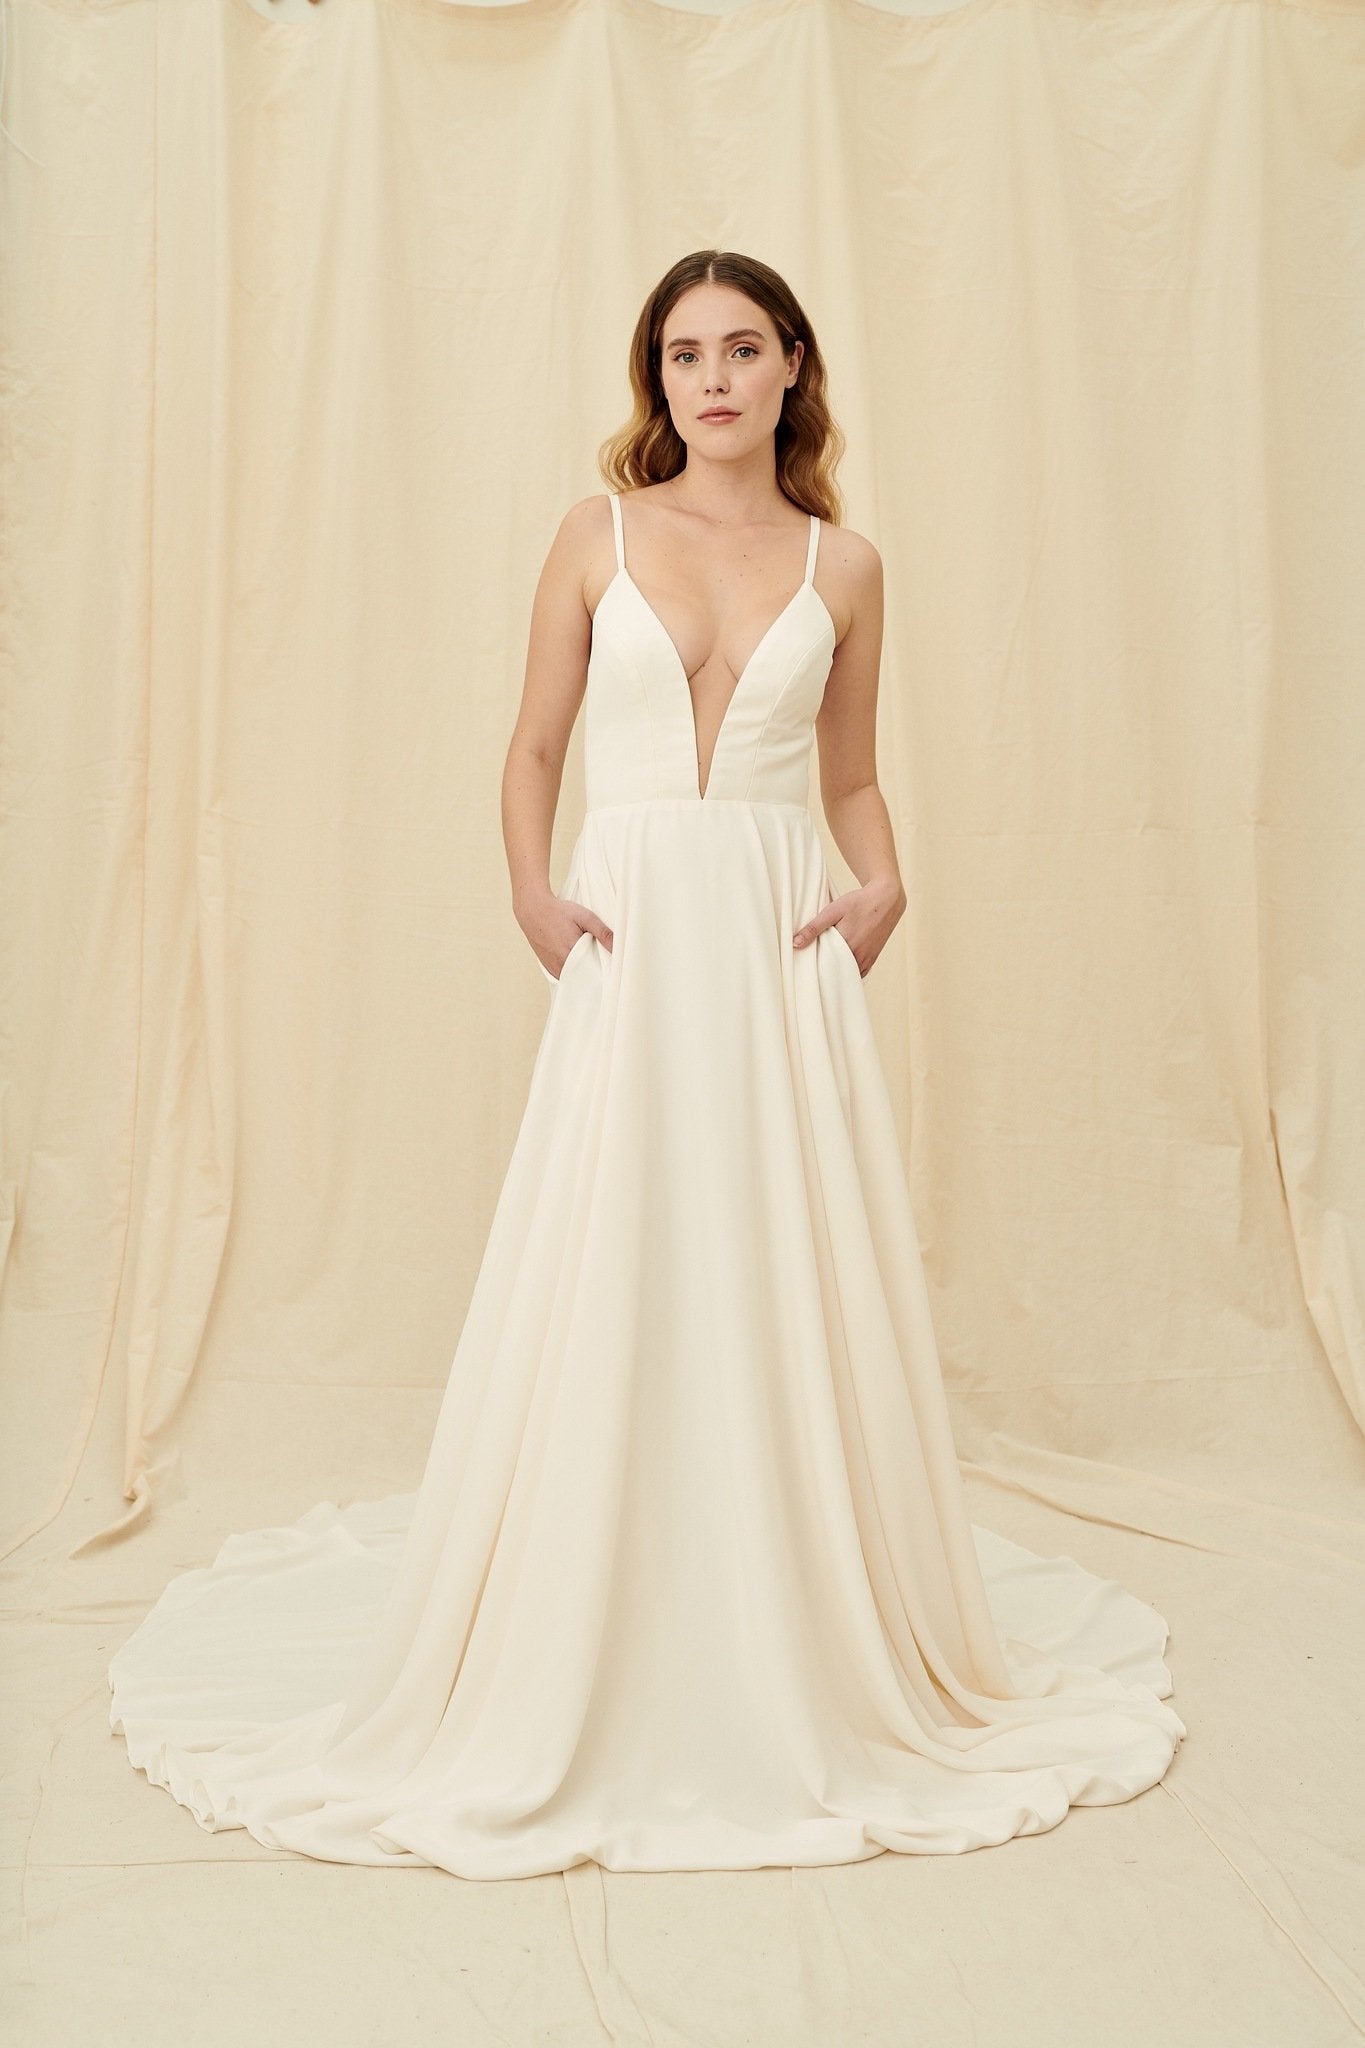 Super low cut crepe wedding dress with spaghetti straps, pockets, and a huge train